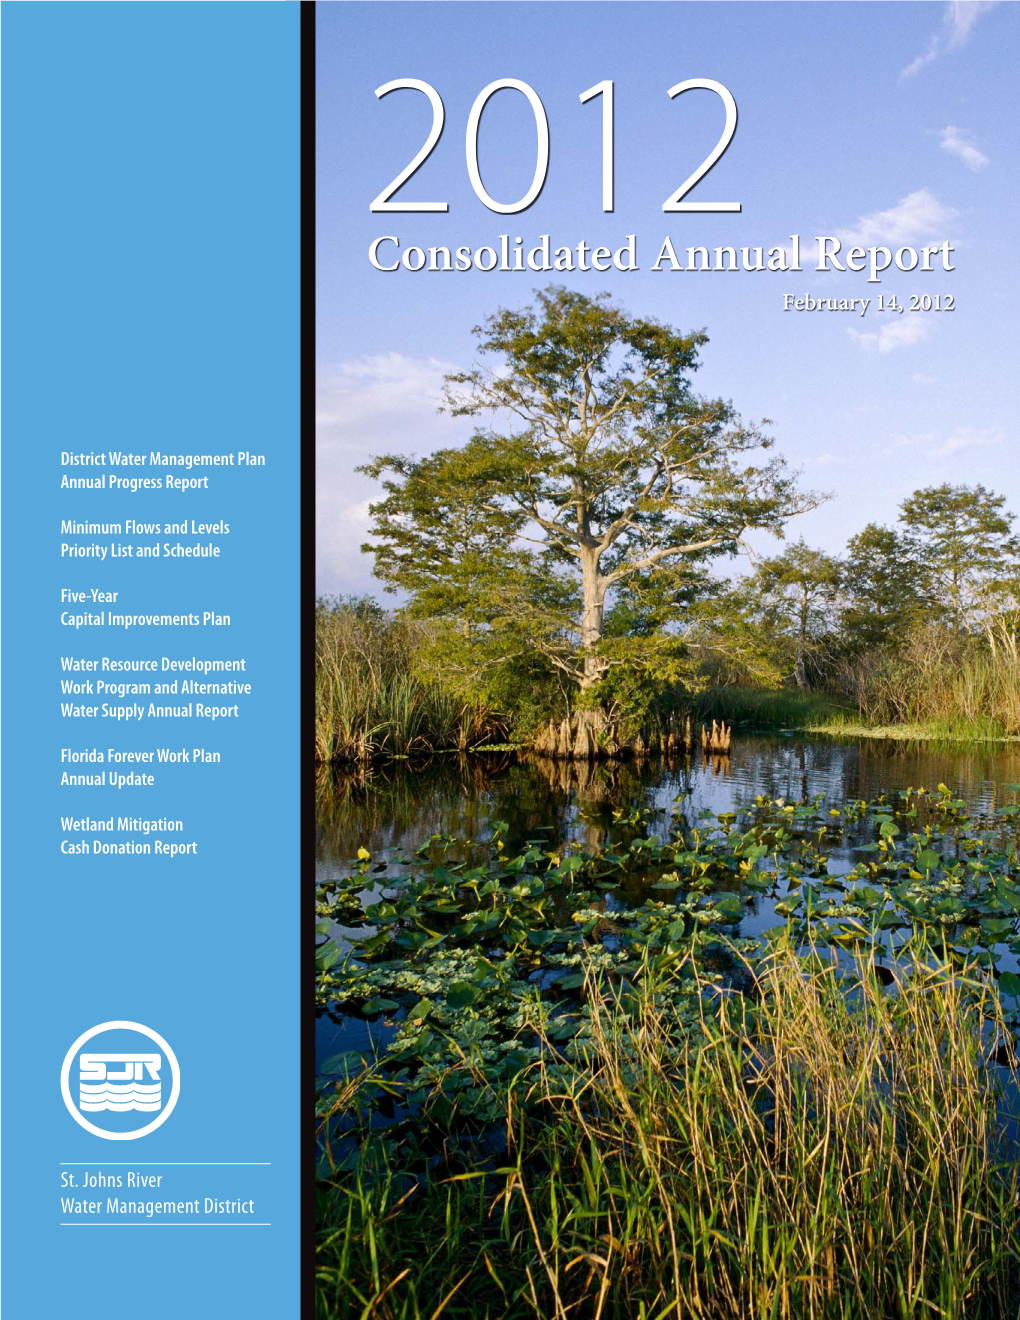 Consolidated Annual Report February 14, 2012